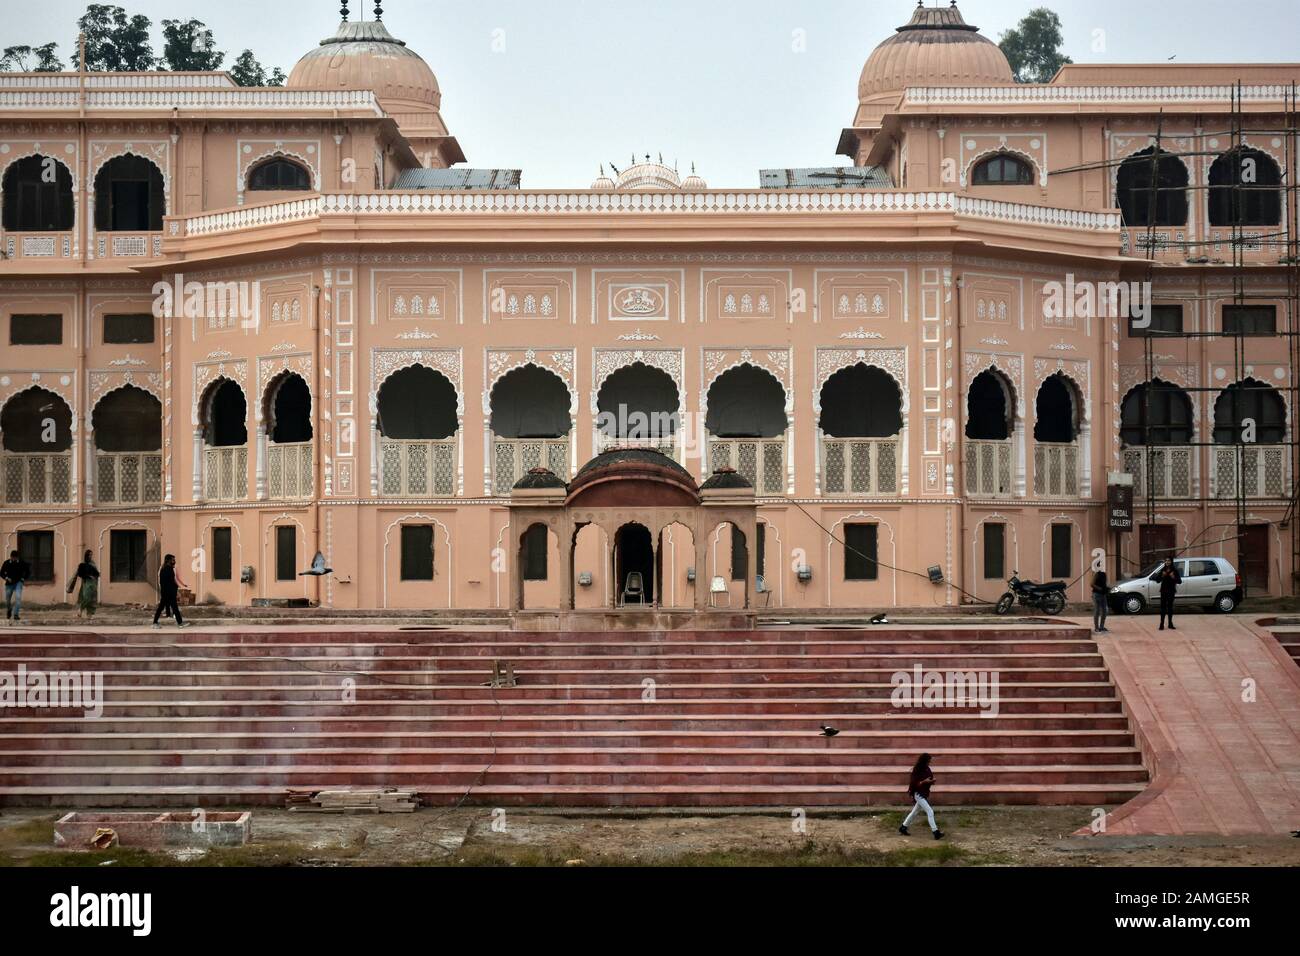 January 13, 2020, Patiala, India: Visitors walk around the Sheesh Mahal  (Palace of Mirrors) in Patiala district of Punjab, India..Sheesh Mahal is  one of the most alluring and magnificent structures in Patiala.